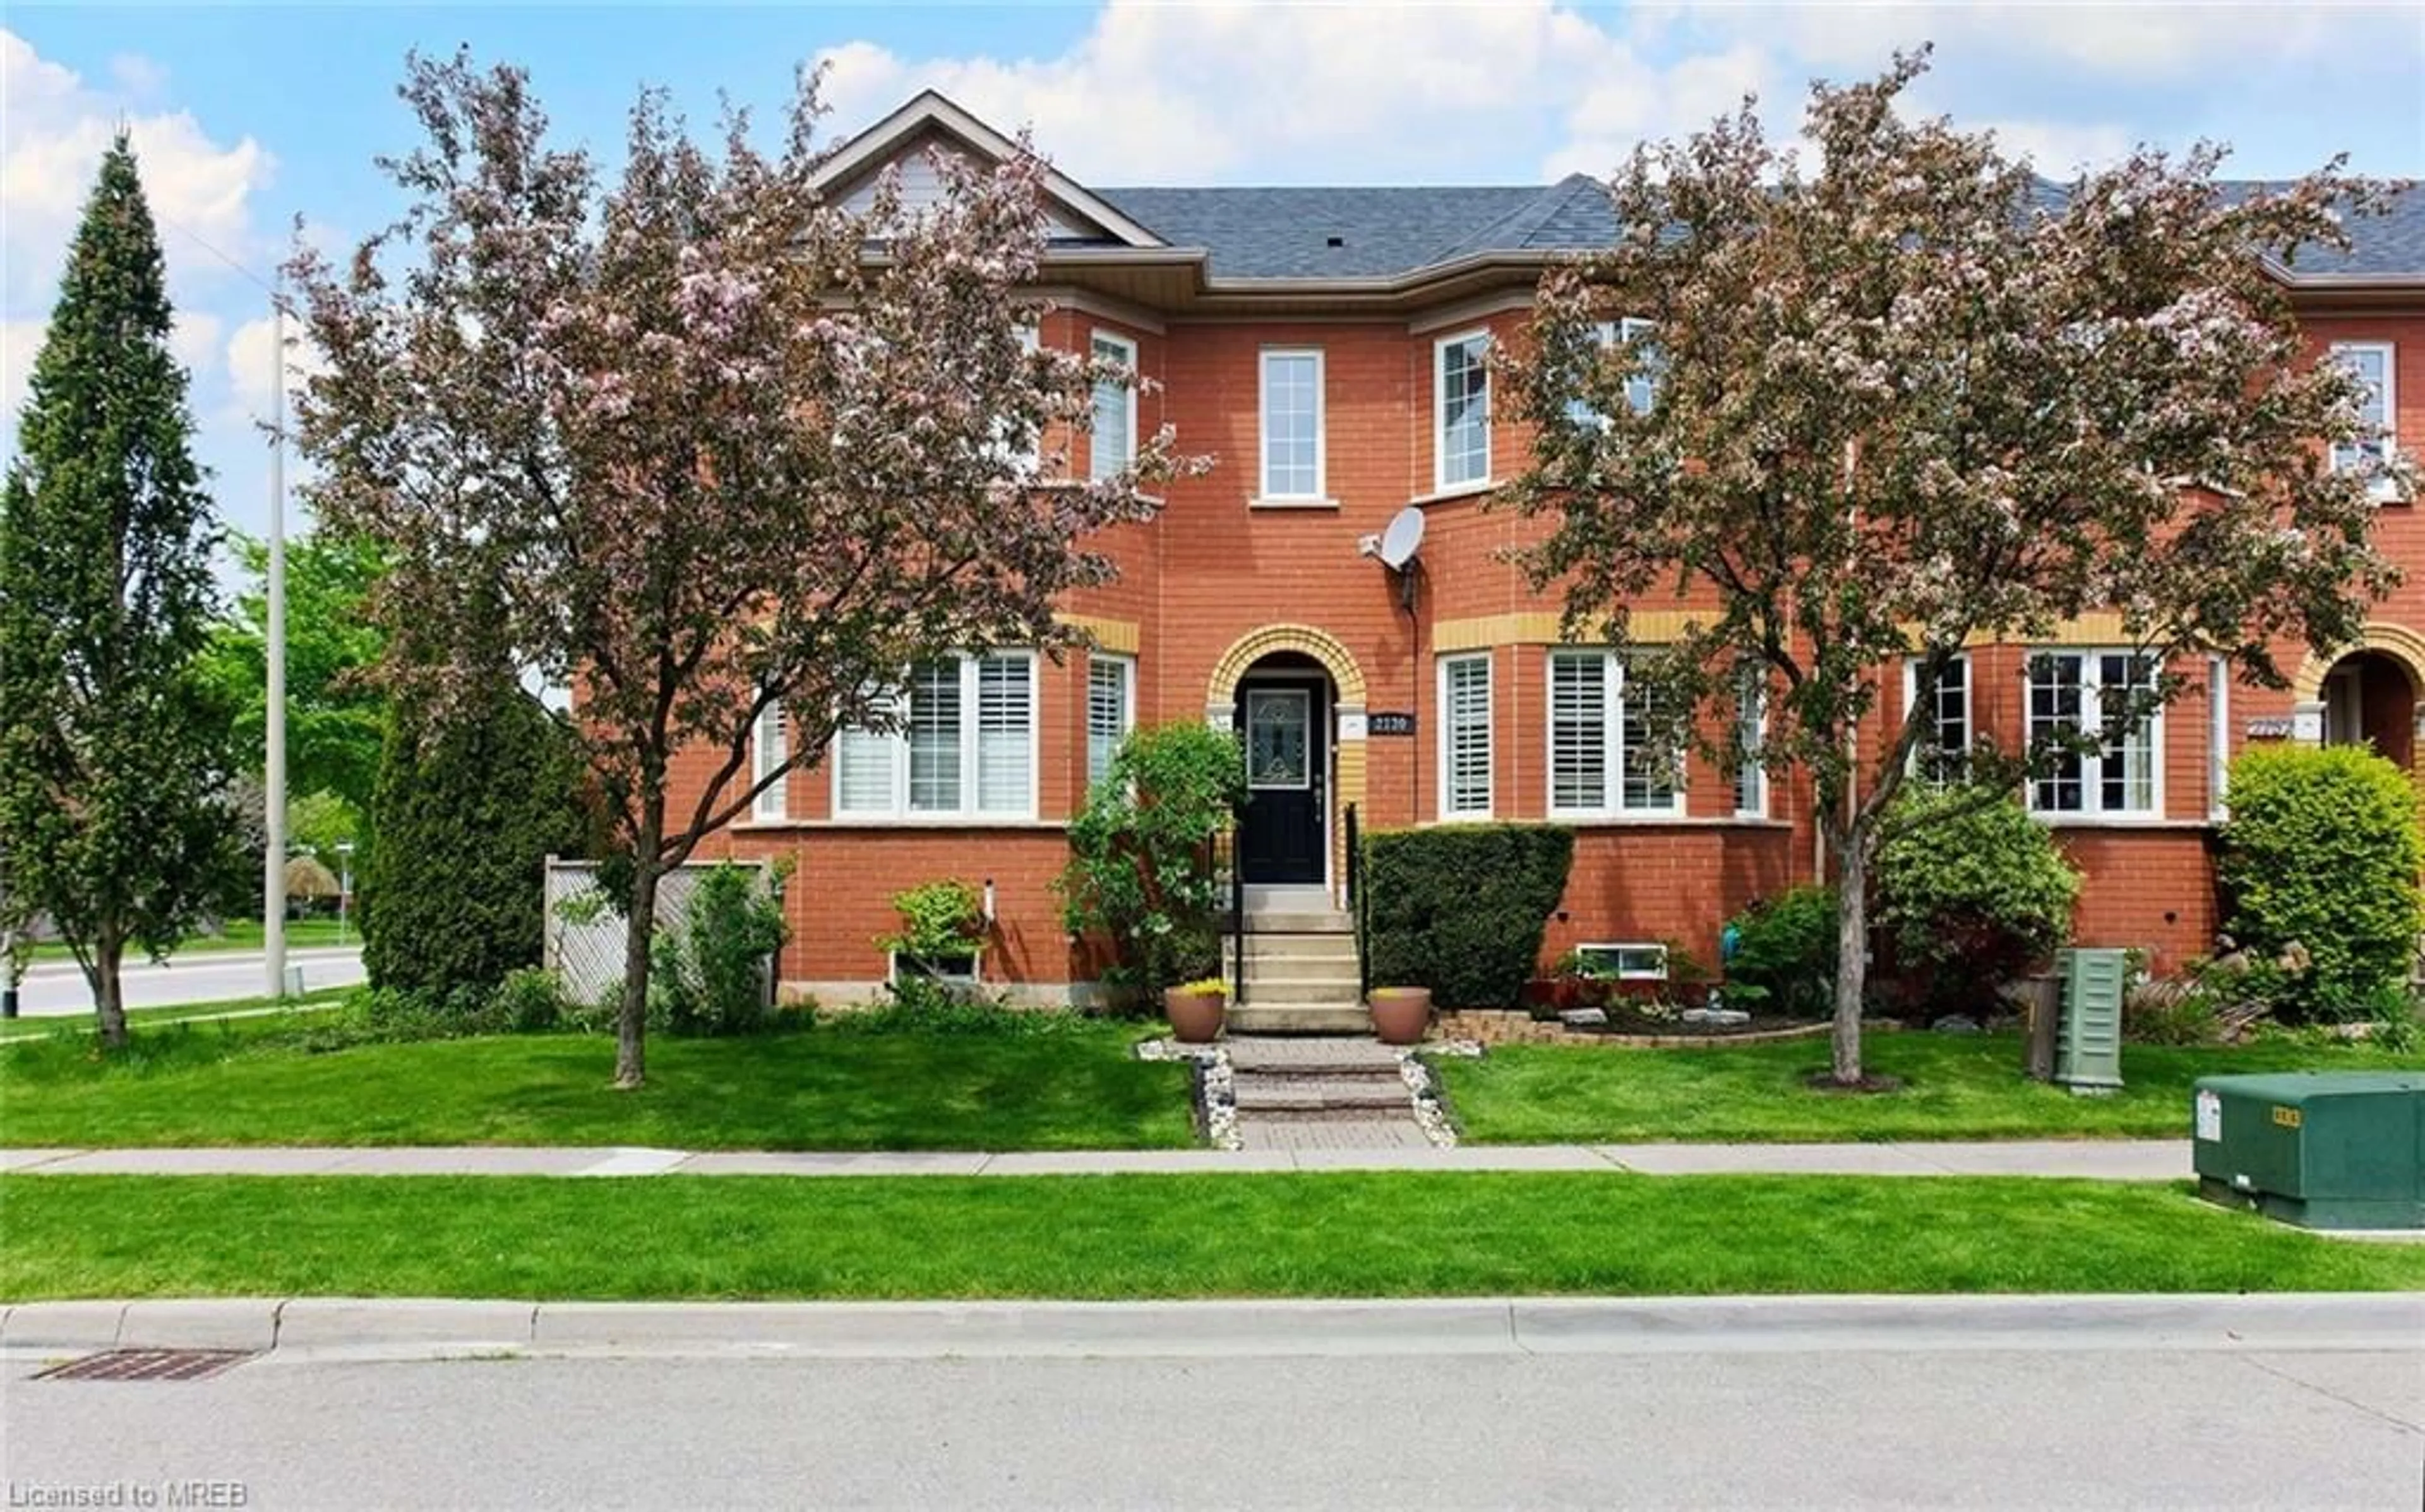 Home with brick exterior material for 2130 Forest Gate Pk, Oakville Ontario L6M 4B4